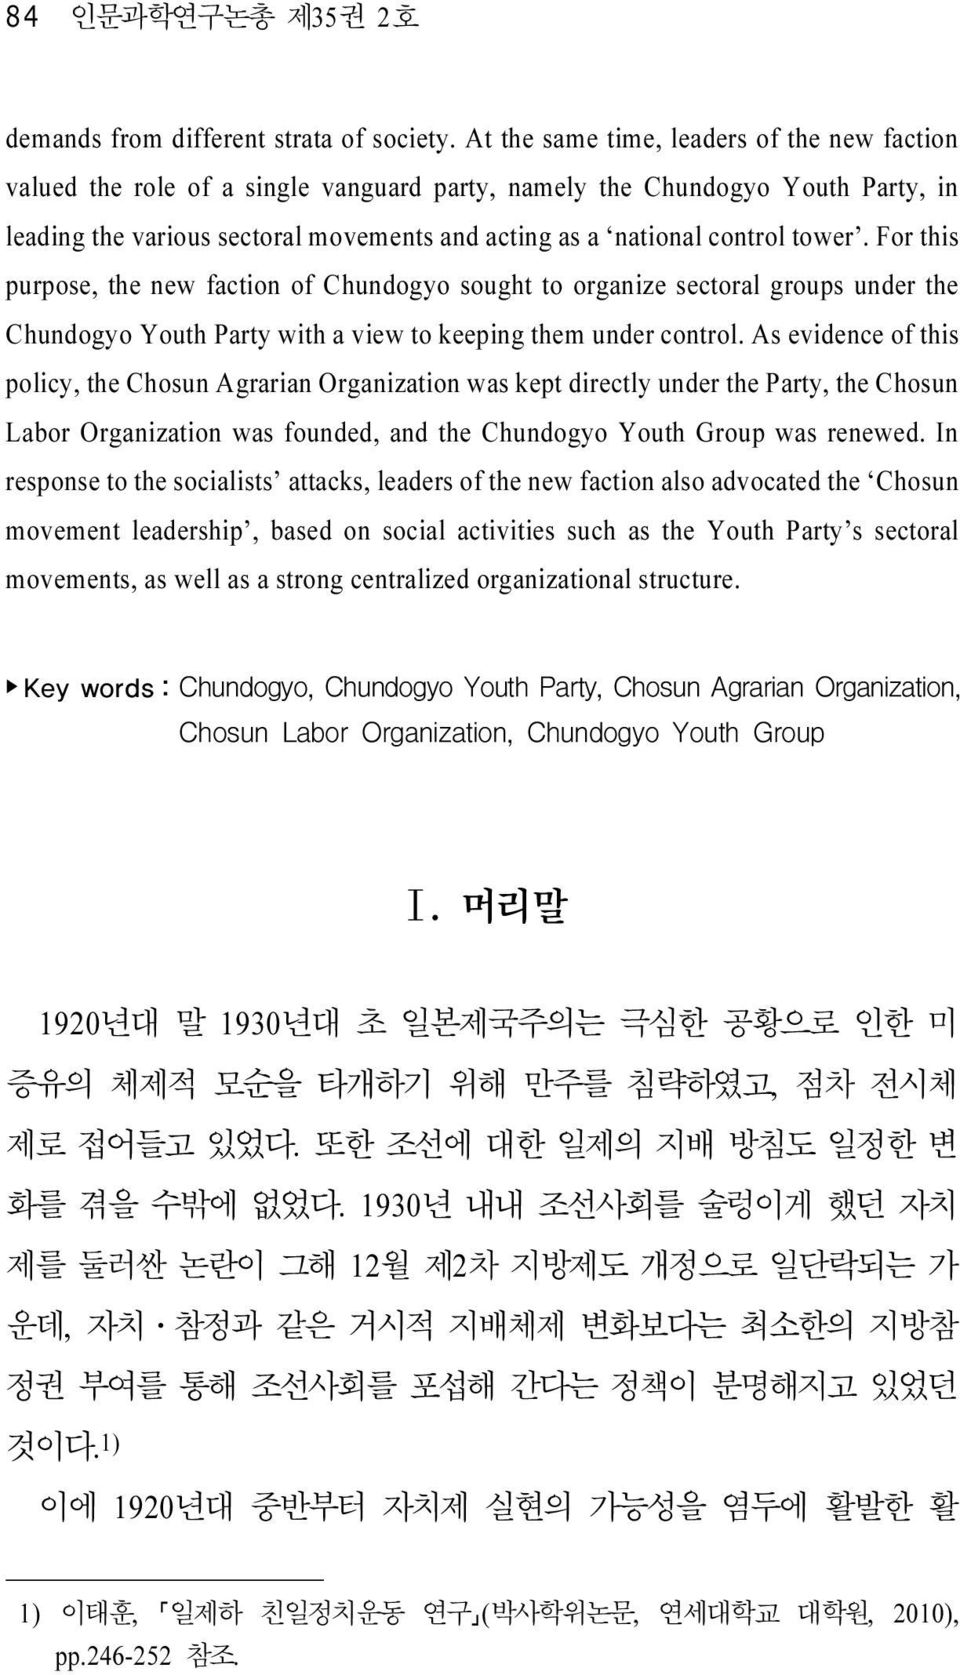 tower. For this purpose, the new faction of Chundogyo sought to organize sectoral groups under the Chundogyo Youth Party with a view to keeping them under control.